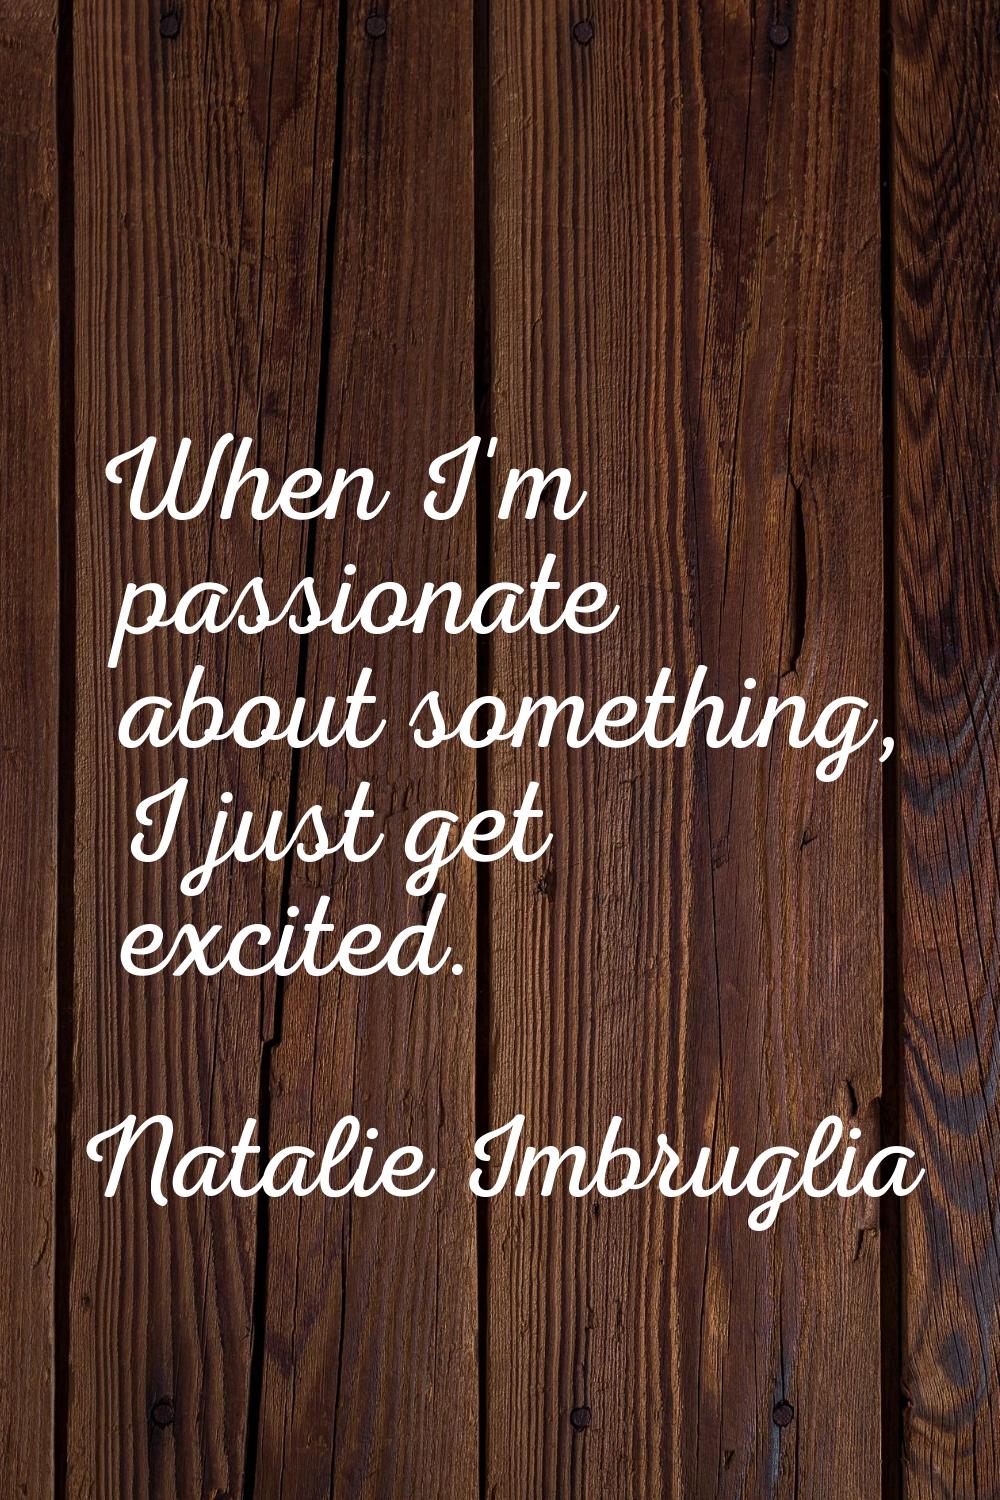 When I'm passionate about something, I just get excited.